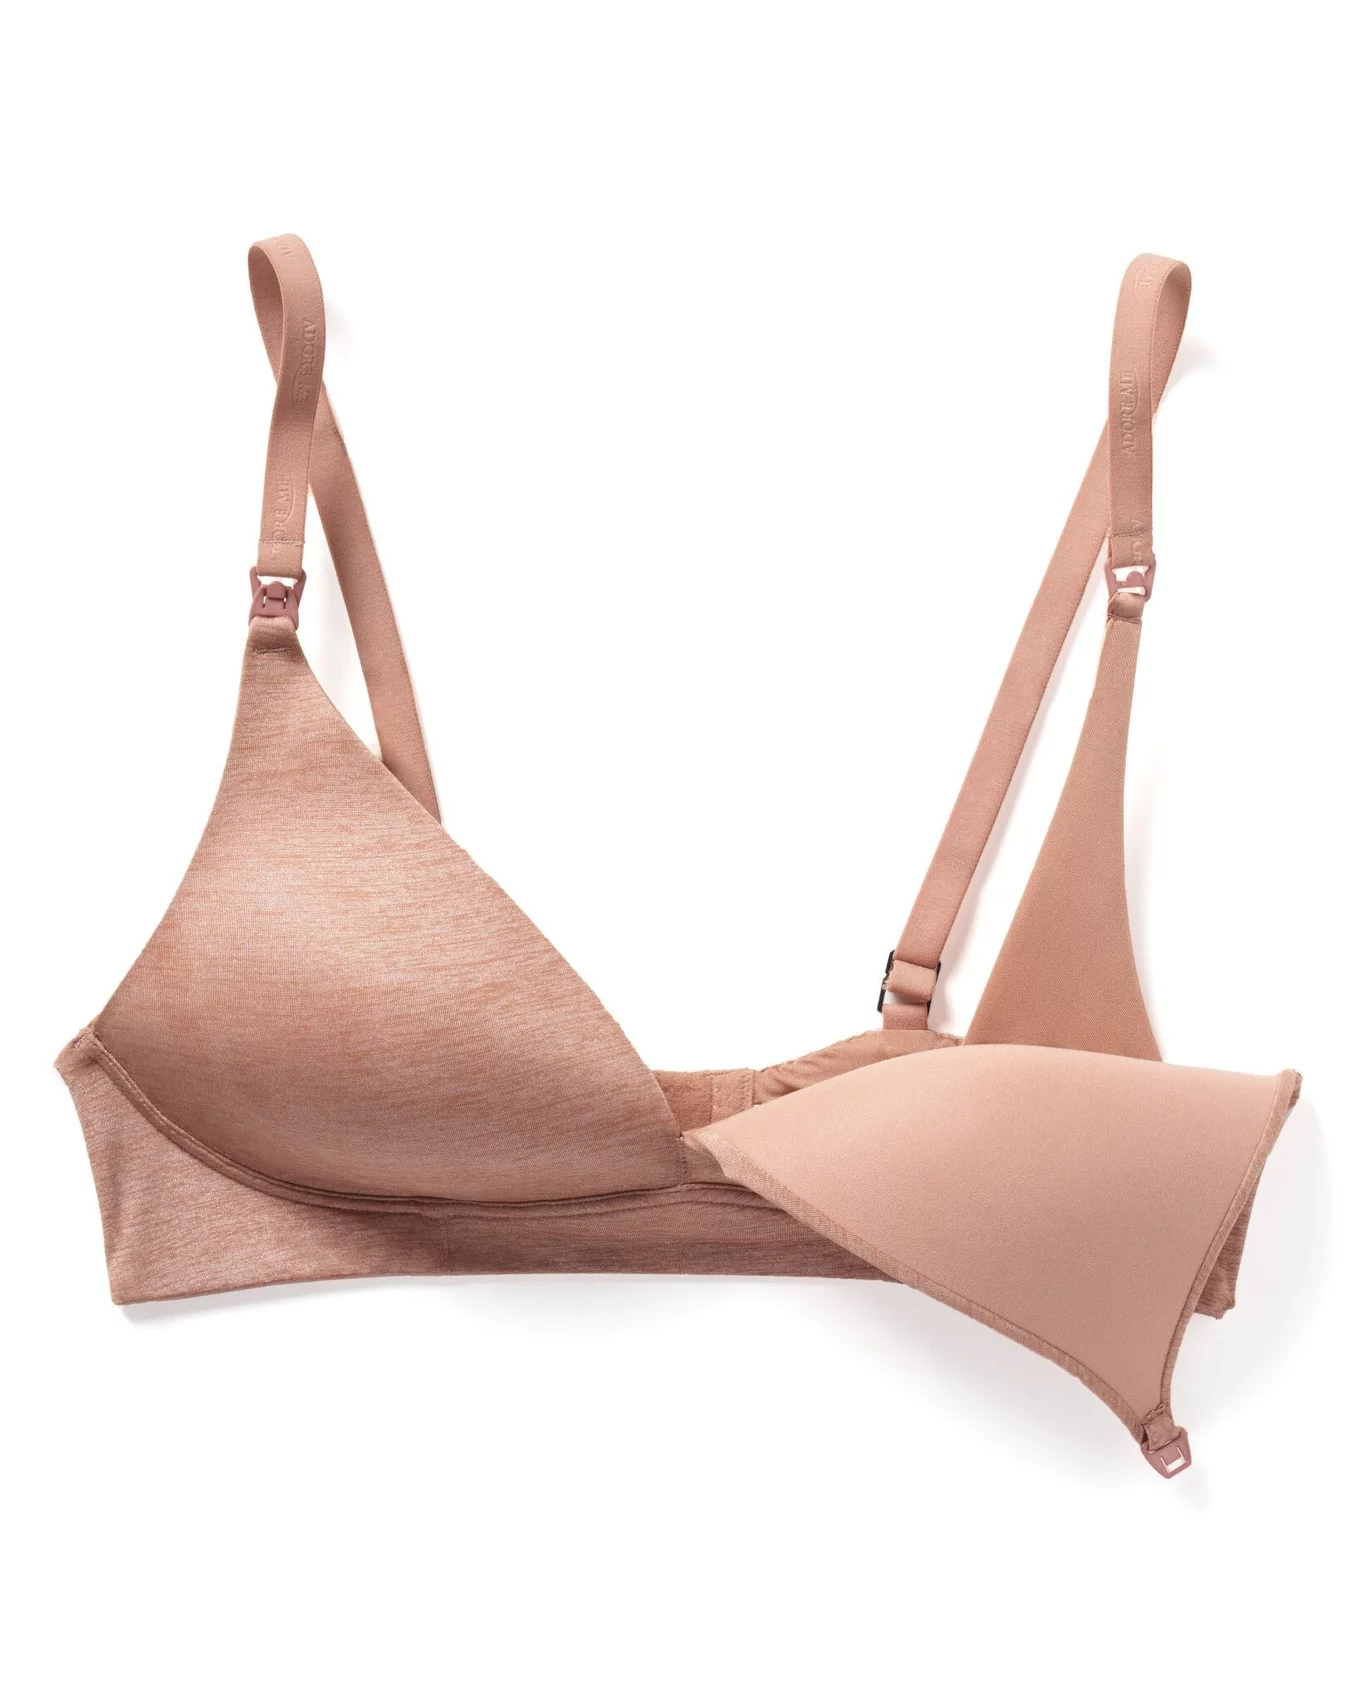 Buy Berry's Intimatess Beige Color Non-Wired & Lightly Padded with